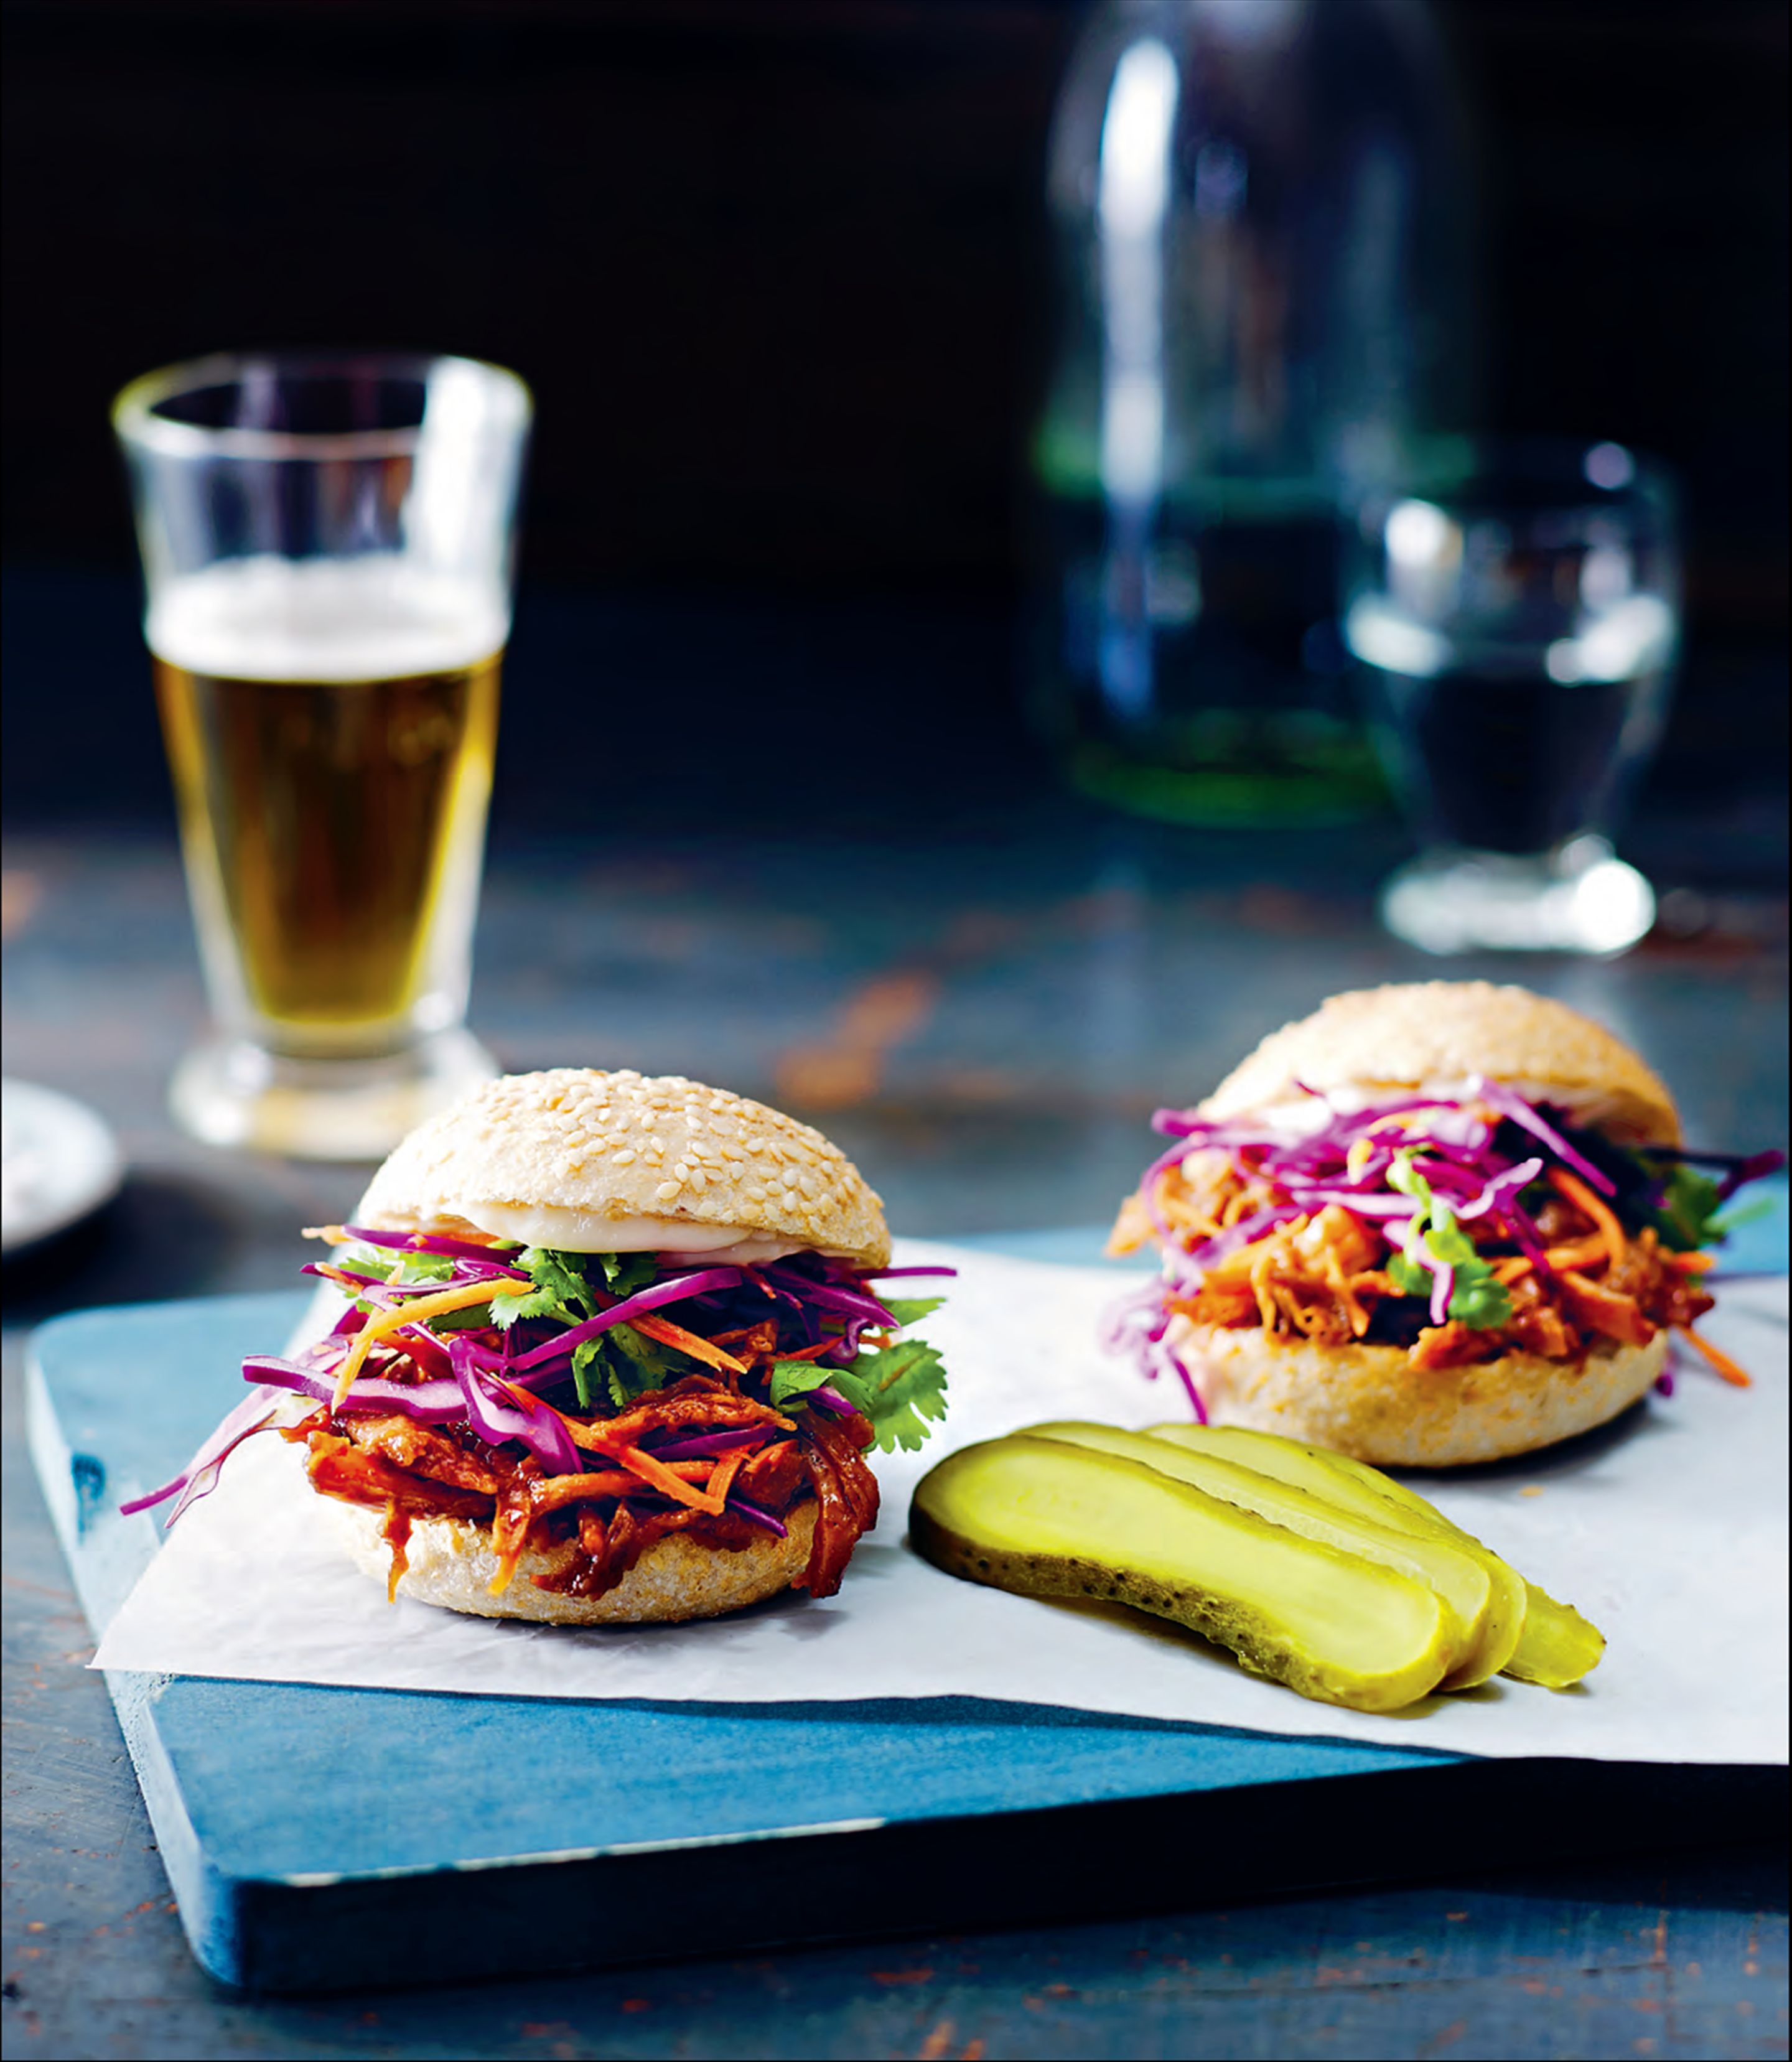 Pulled pork sliders with coleslaw and pickles